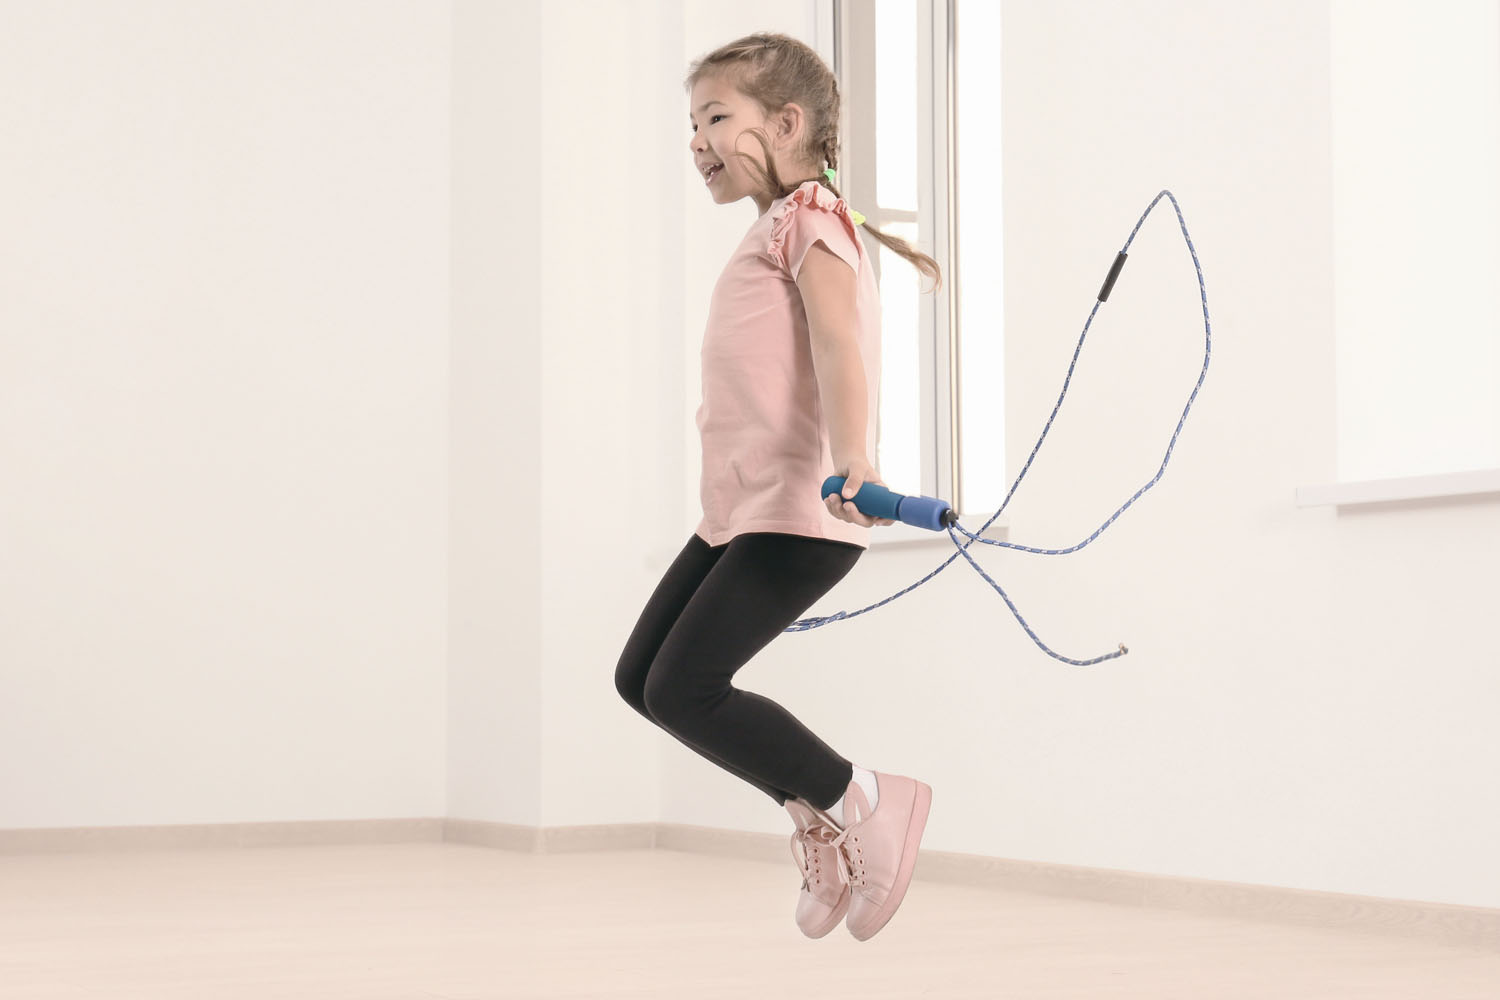 PHO_Girl jumping rope_Fun Exercises for Healthier Kids